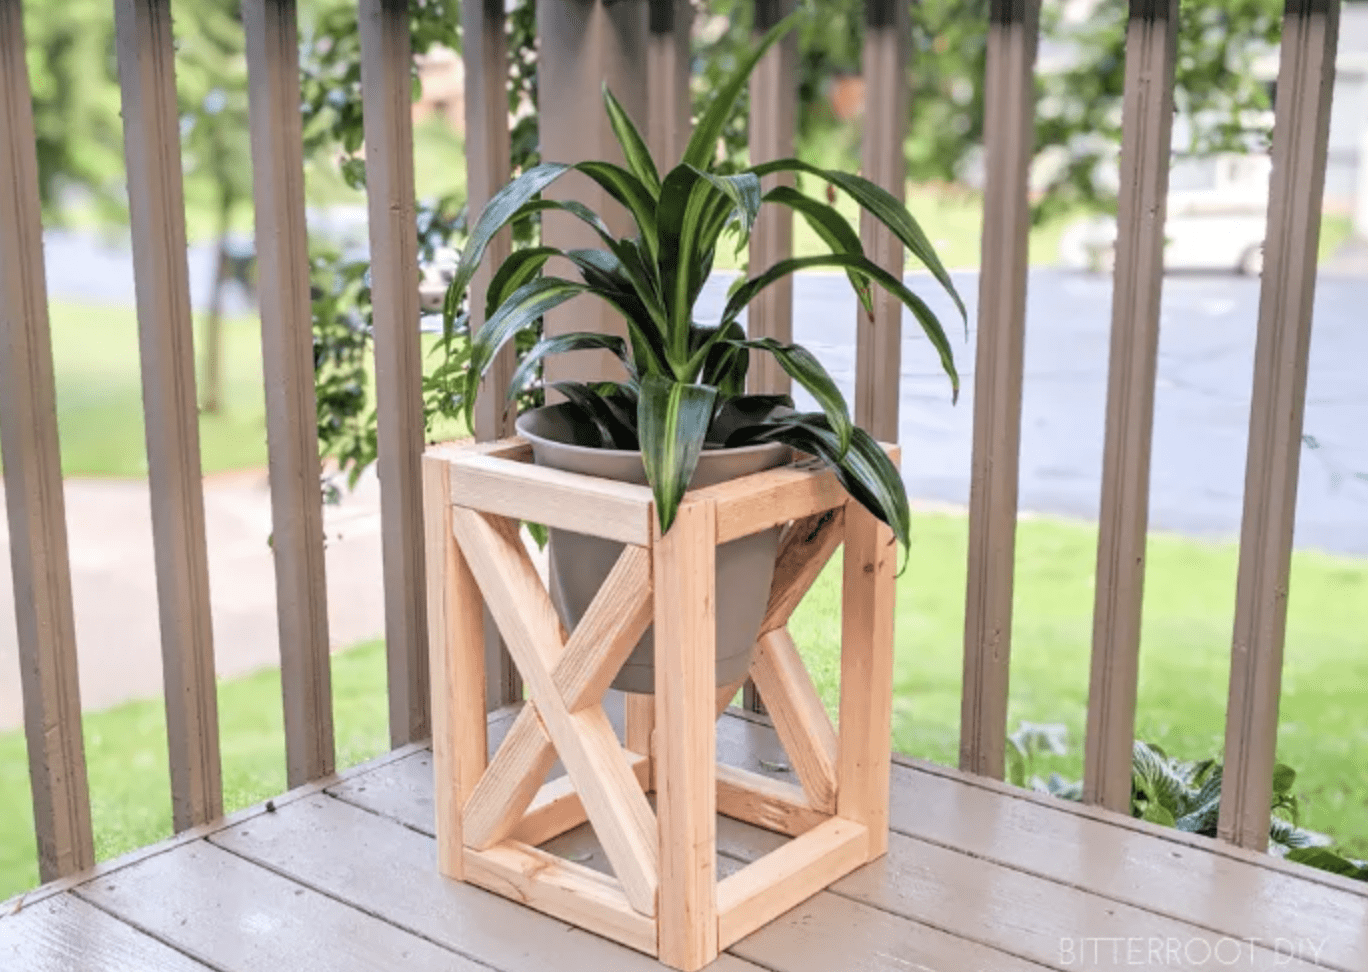 x frame wood outdoor plant stand with potted plant inside on porch